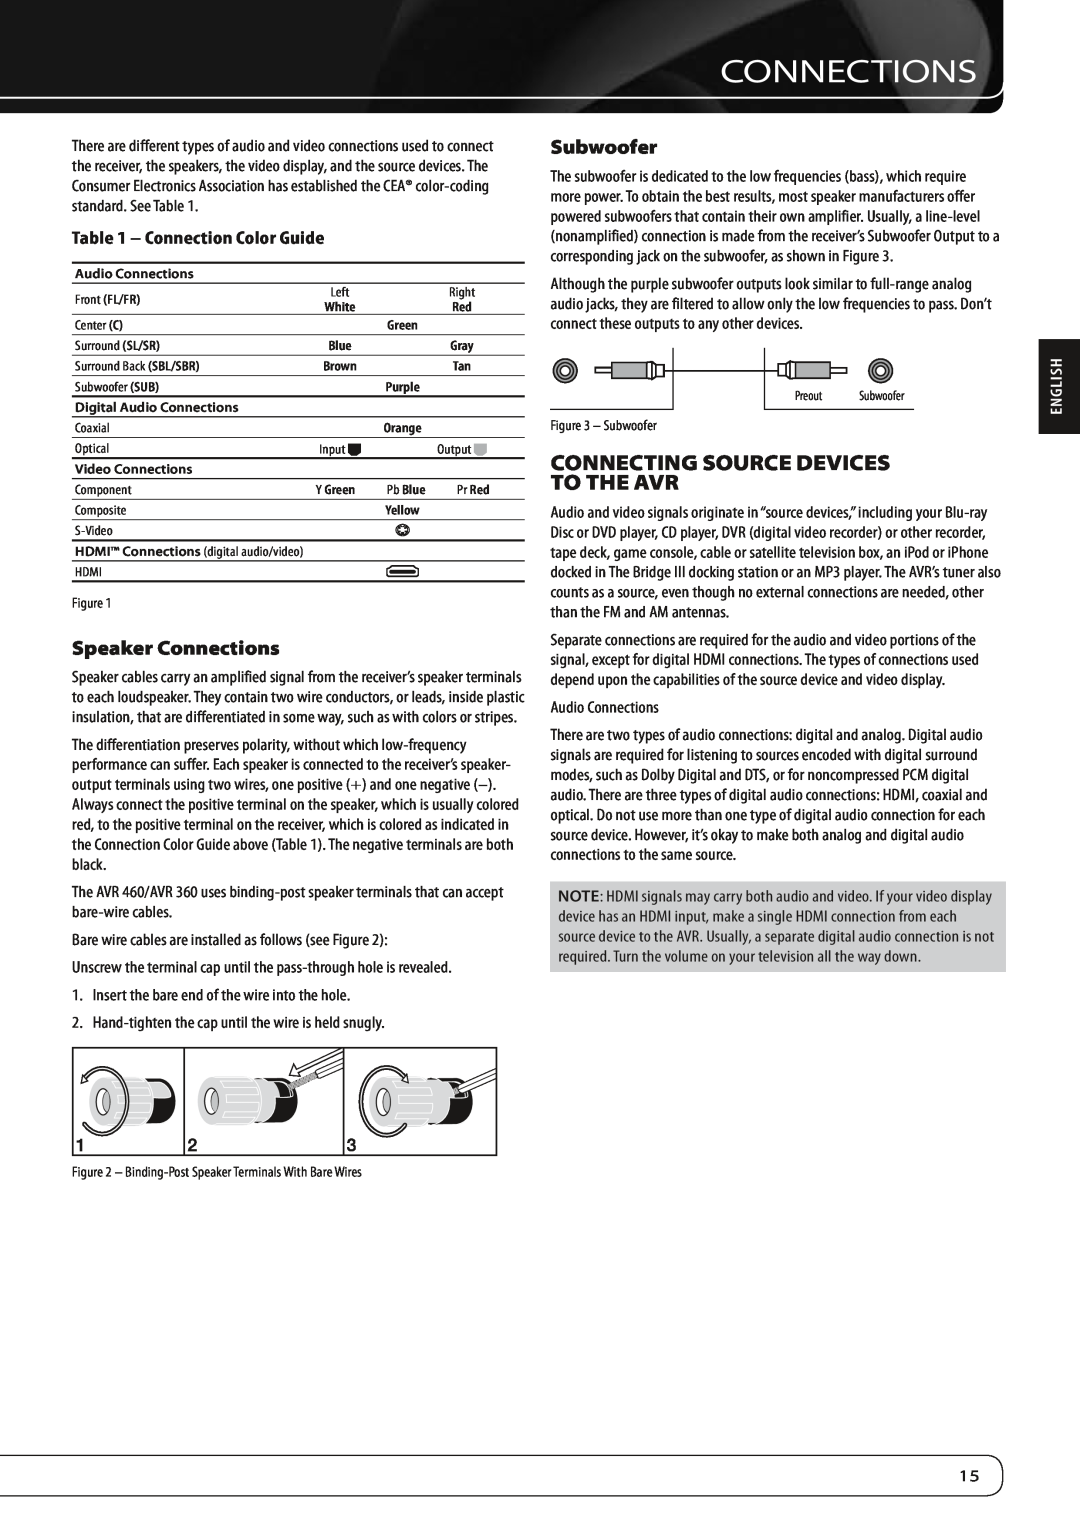 Harman-Kardon AVR360 owner manual Connecting Source Devices to the AVR, Speaker Connections, Subwoofer, English 